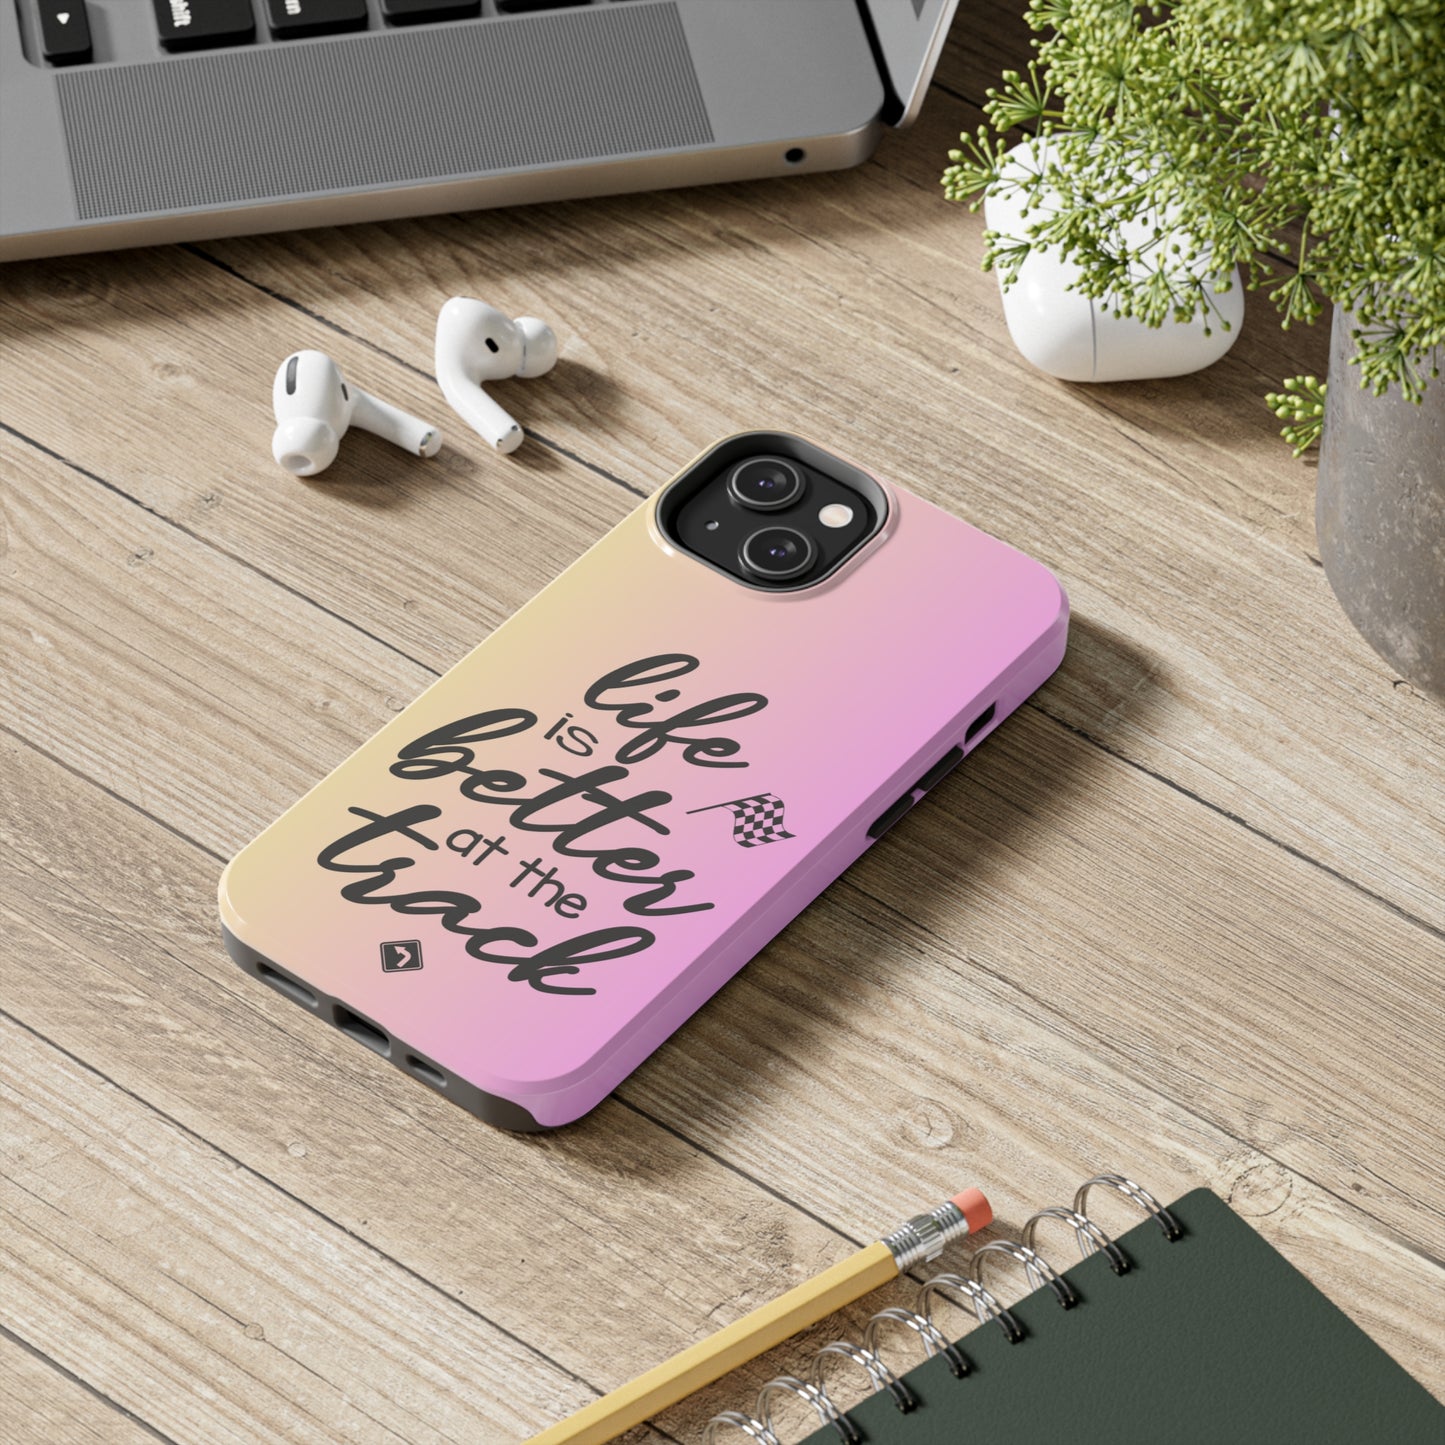 Life Is Better At The Racetrack Two-Tone Tough Phone Cases